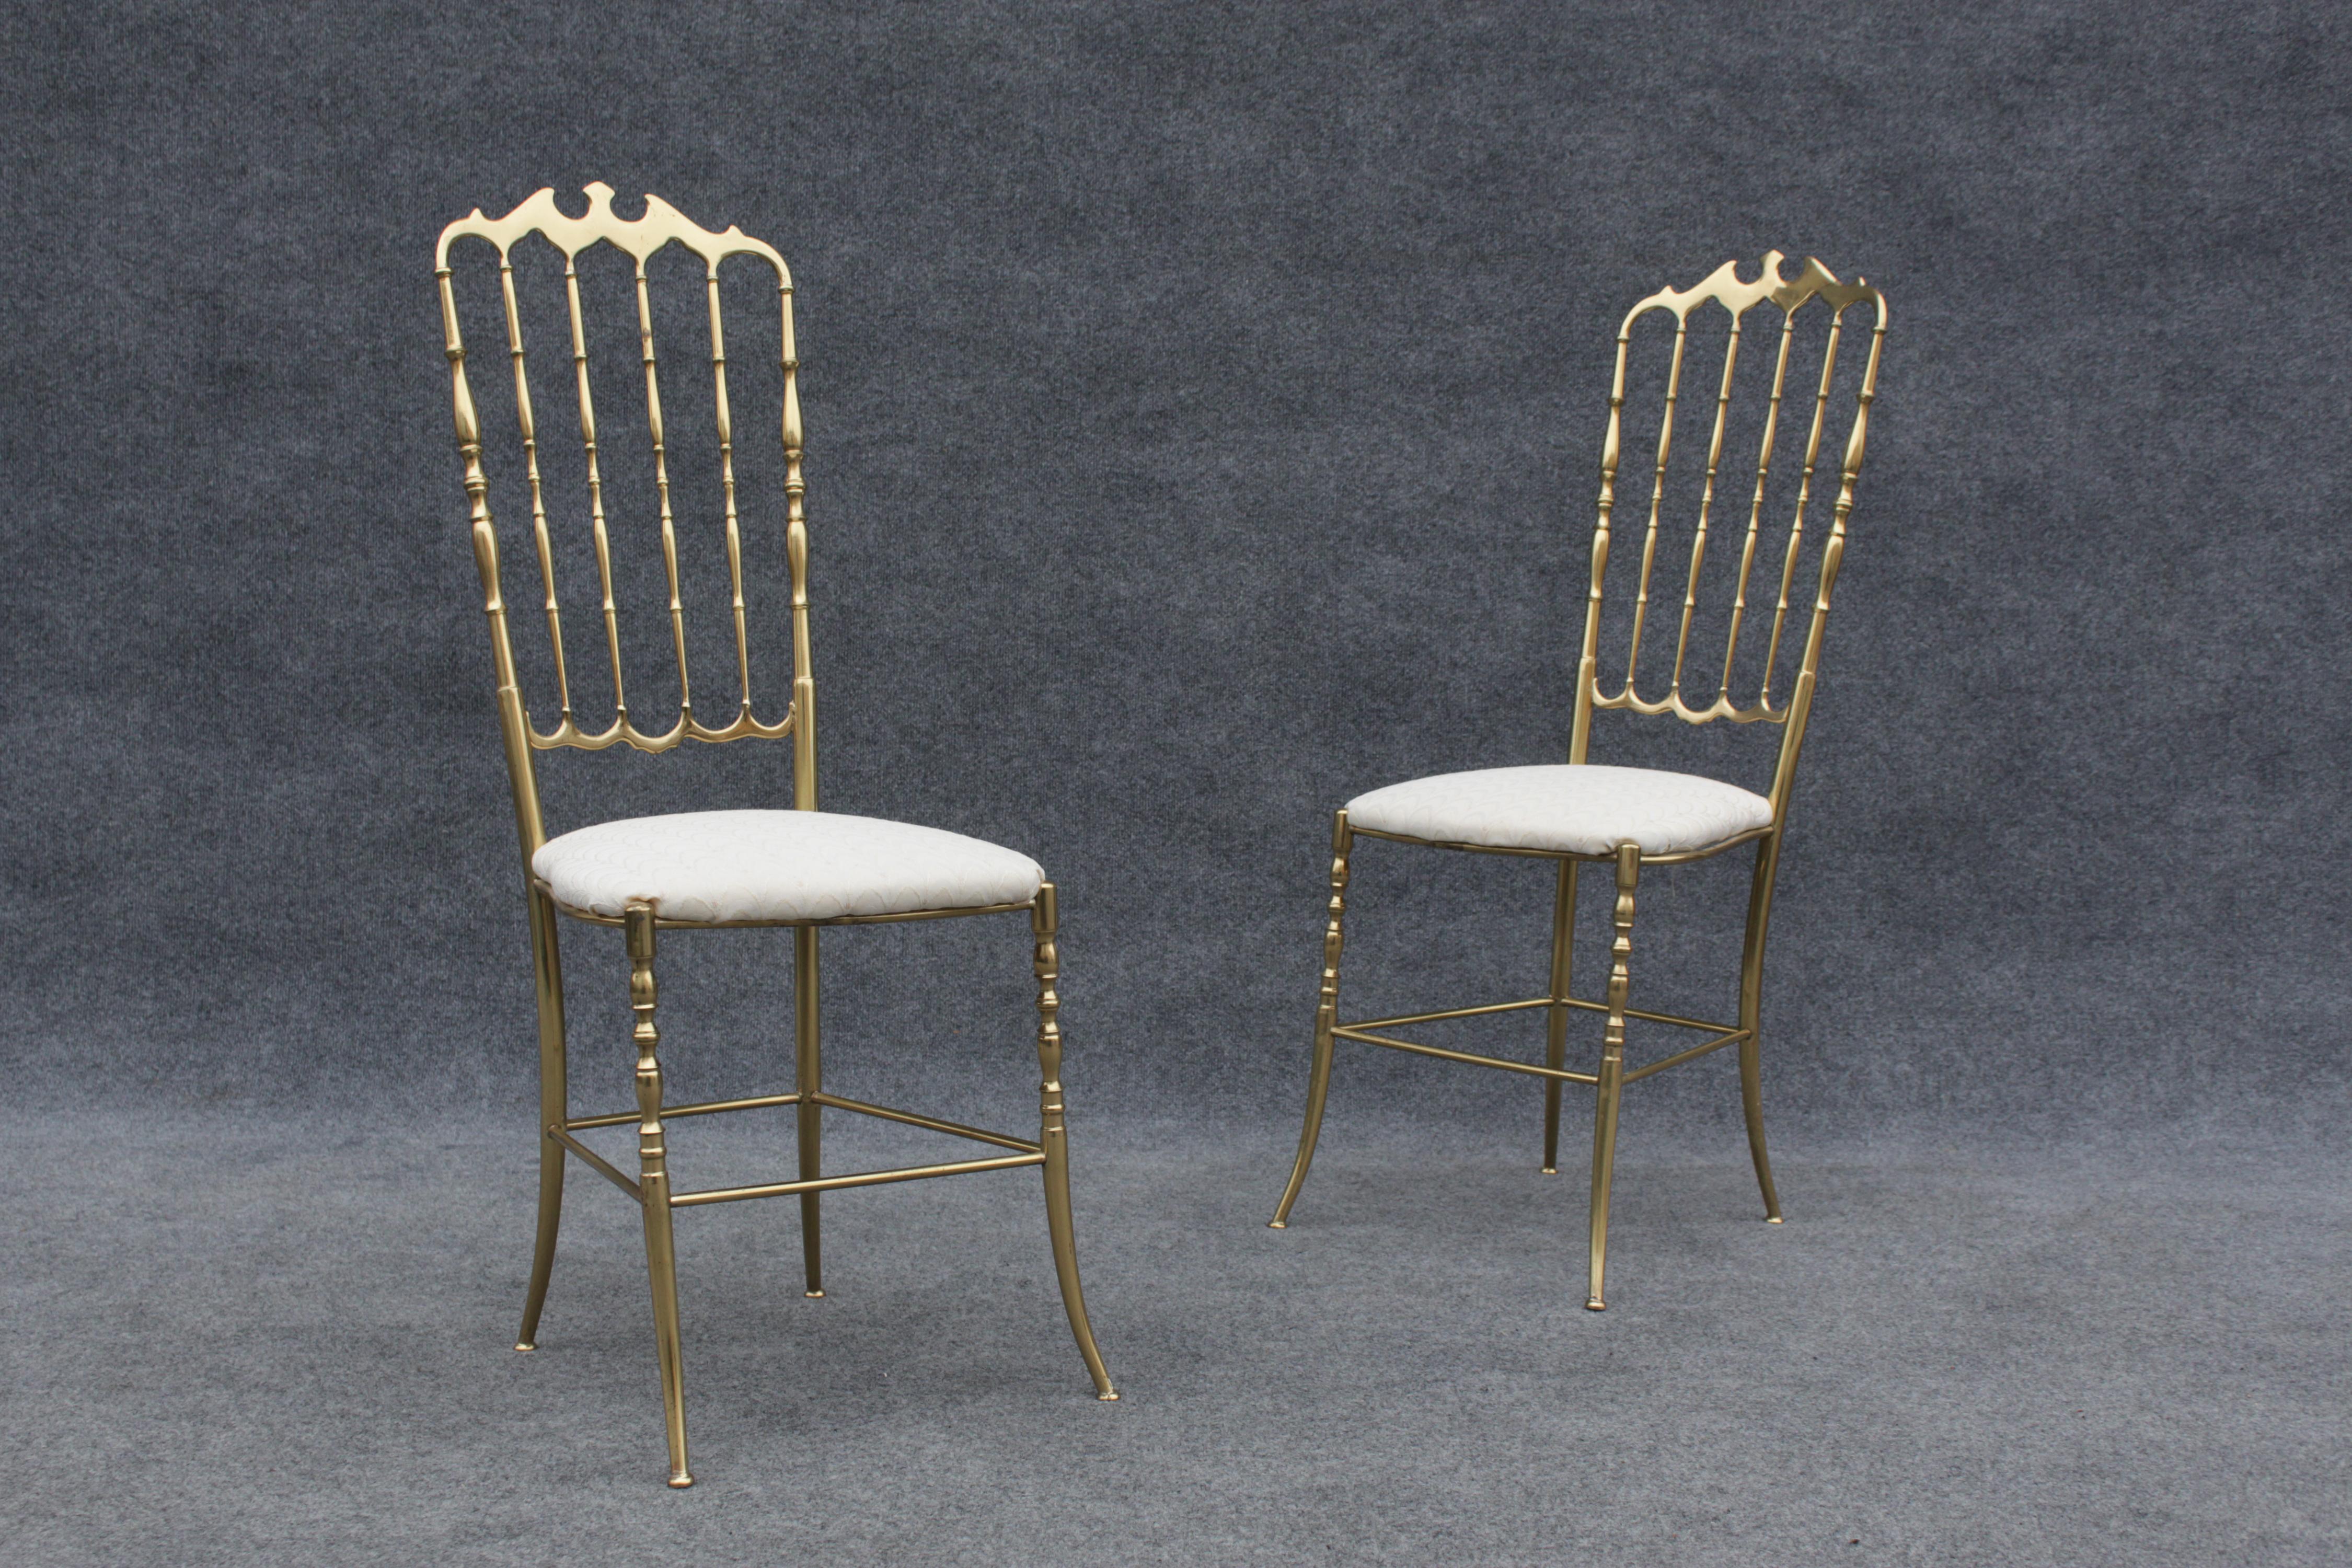 Pair of Solid Brass & White Upholstered Dining or Side Chairs by Chiavari Italy For Sale 6